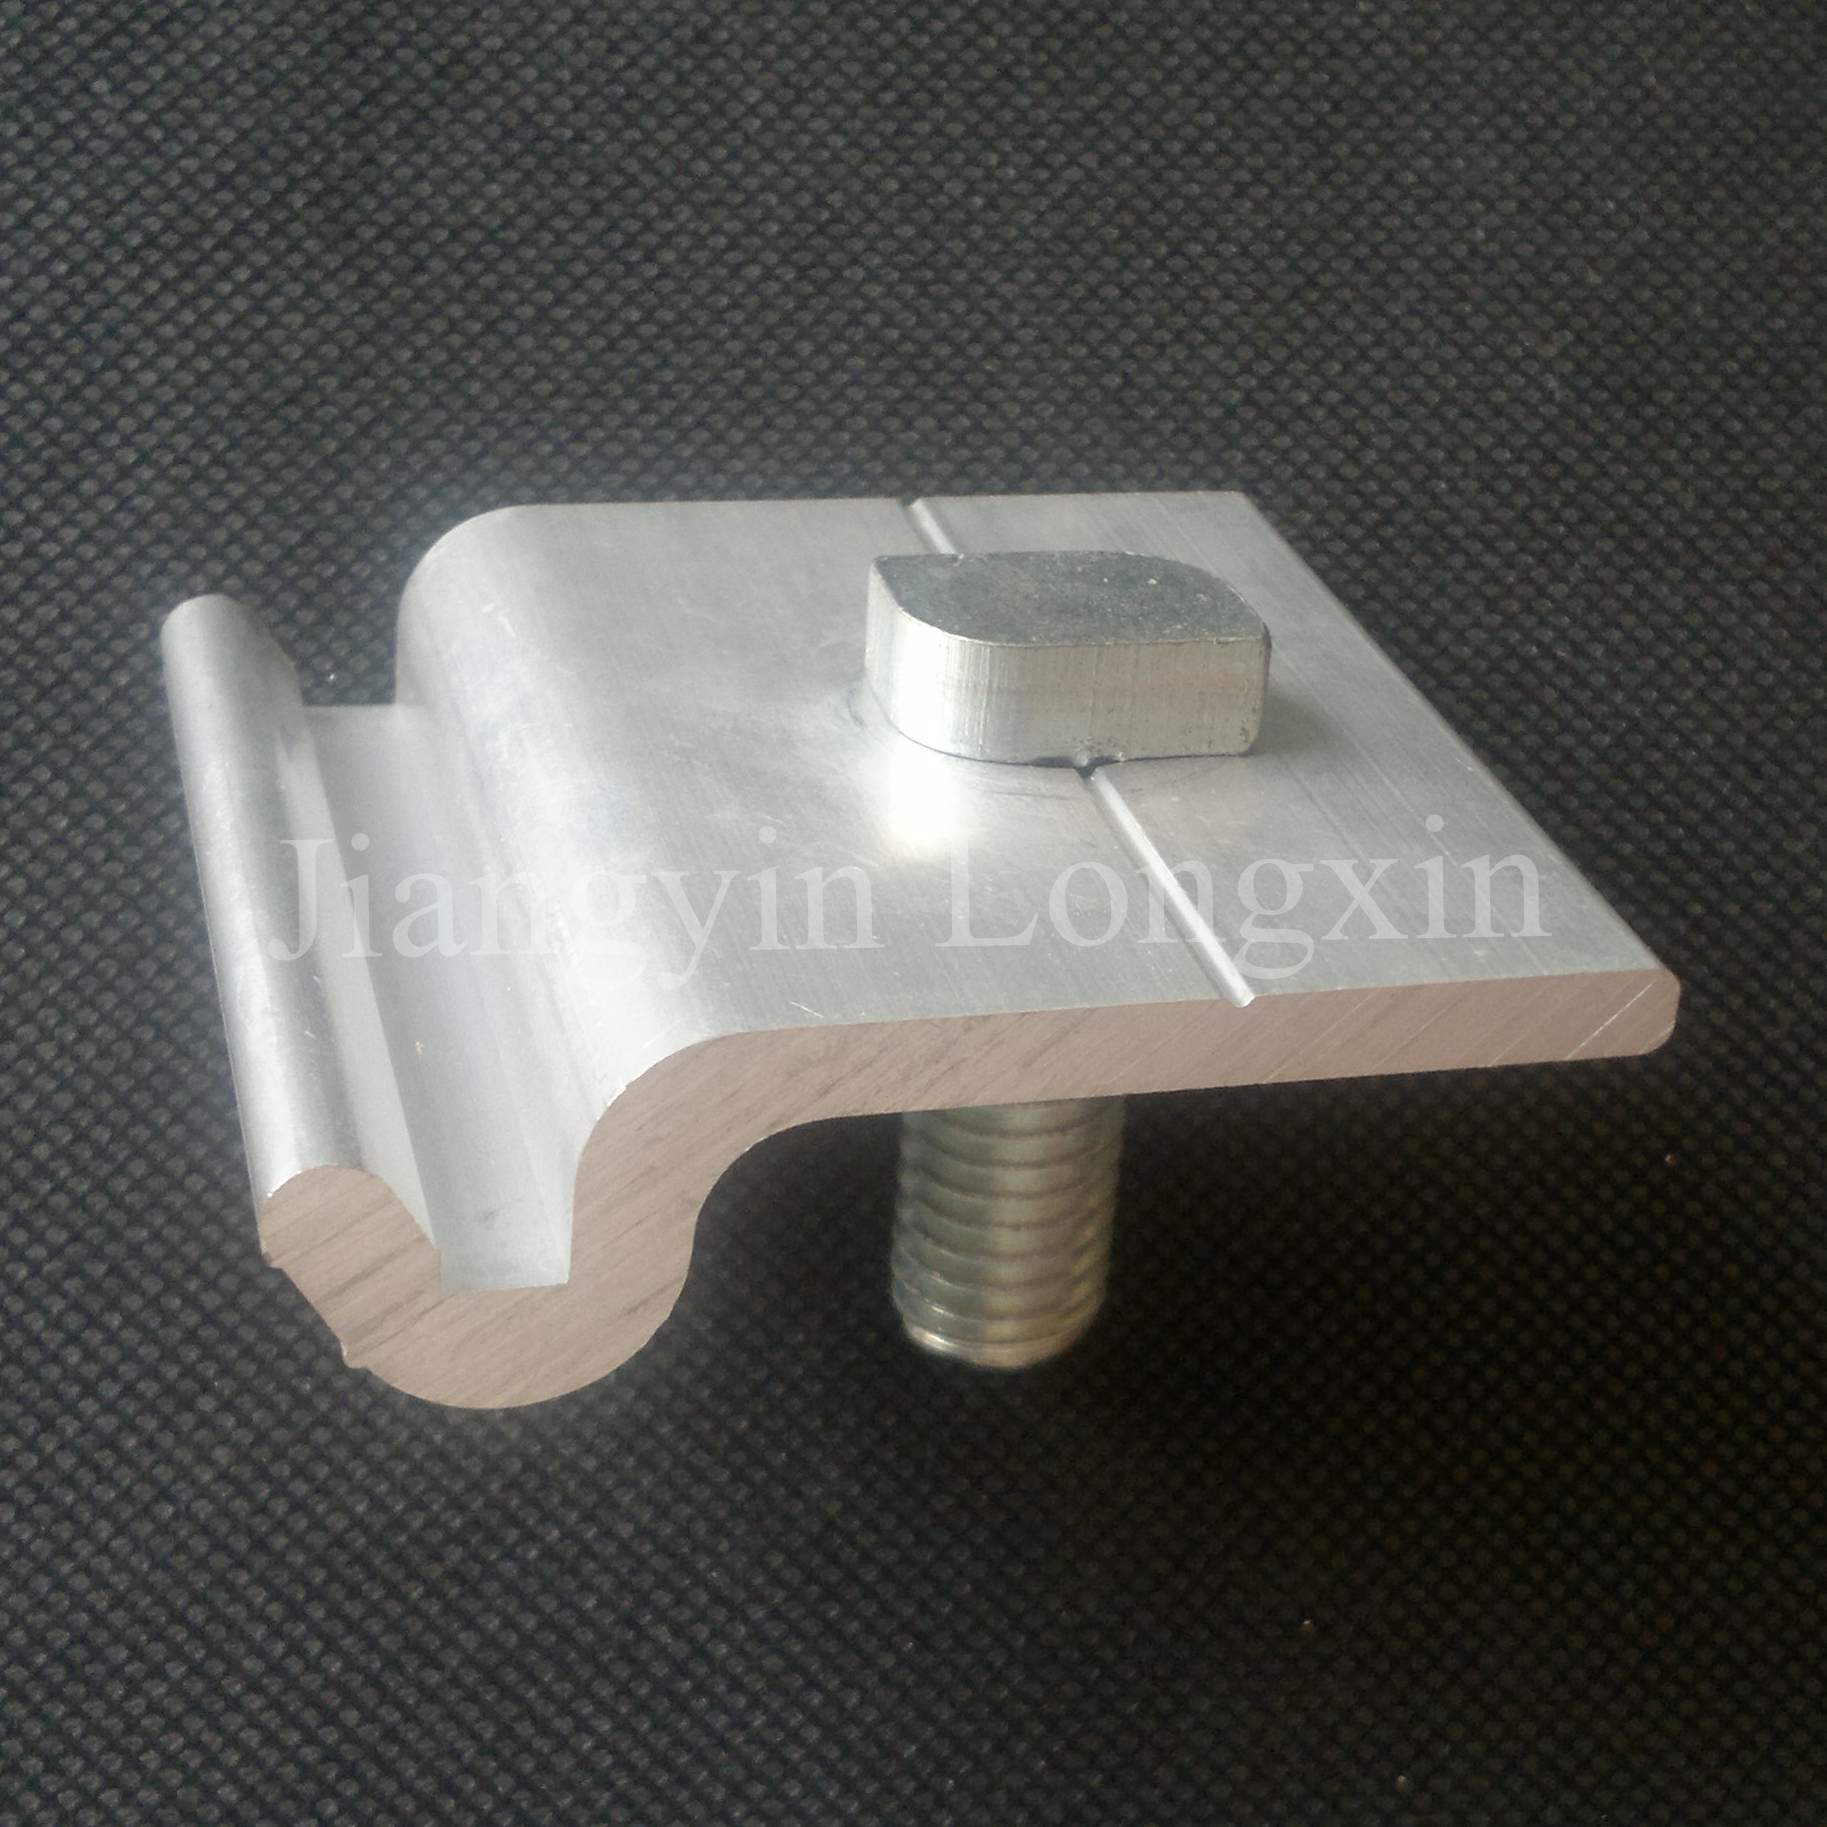 Connection Parts for Aluminium Scaffold Beam